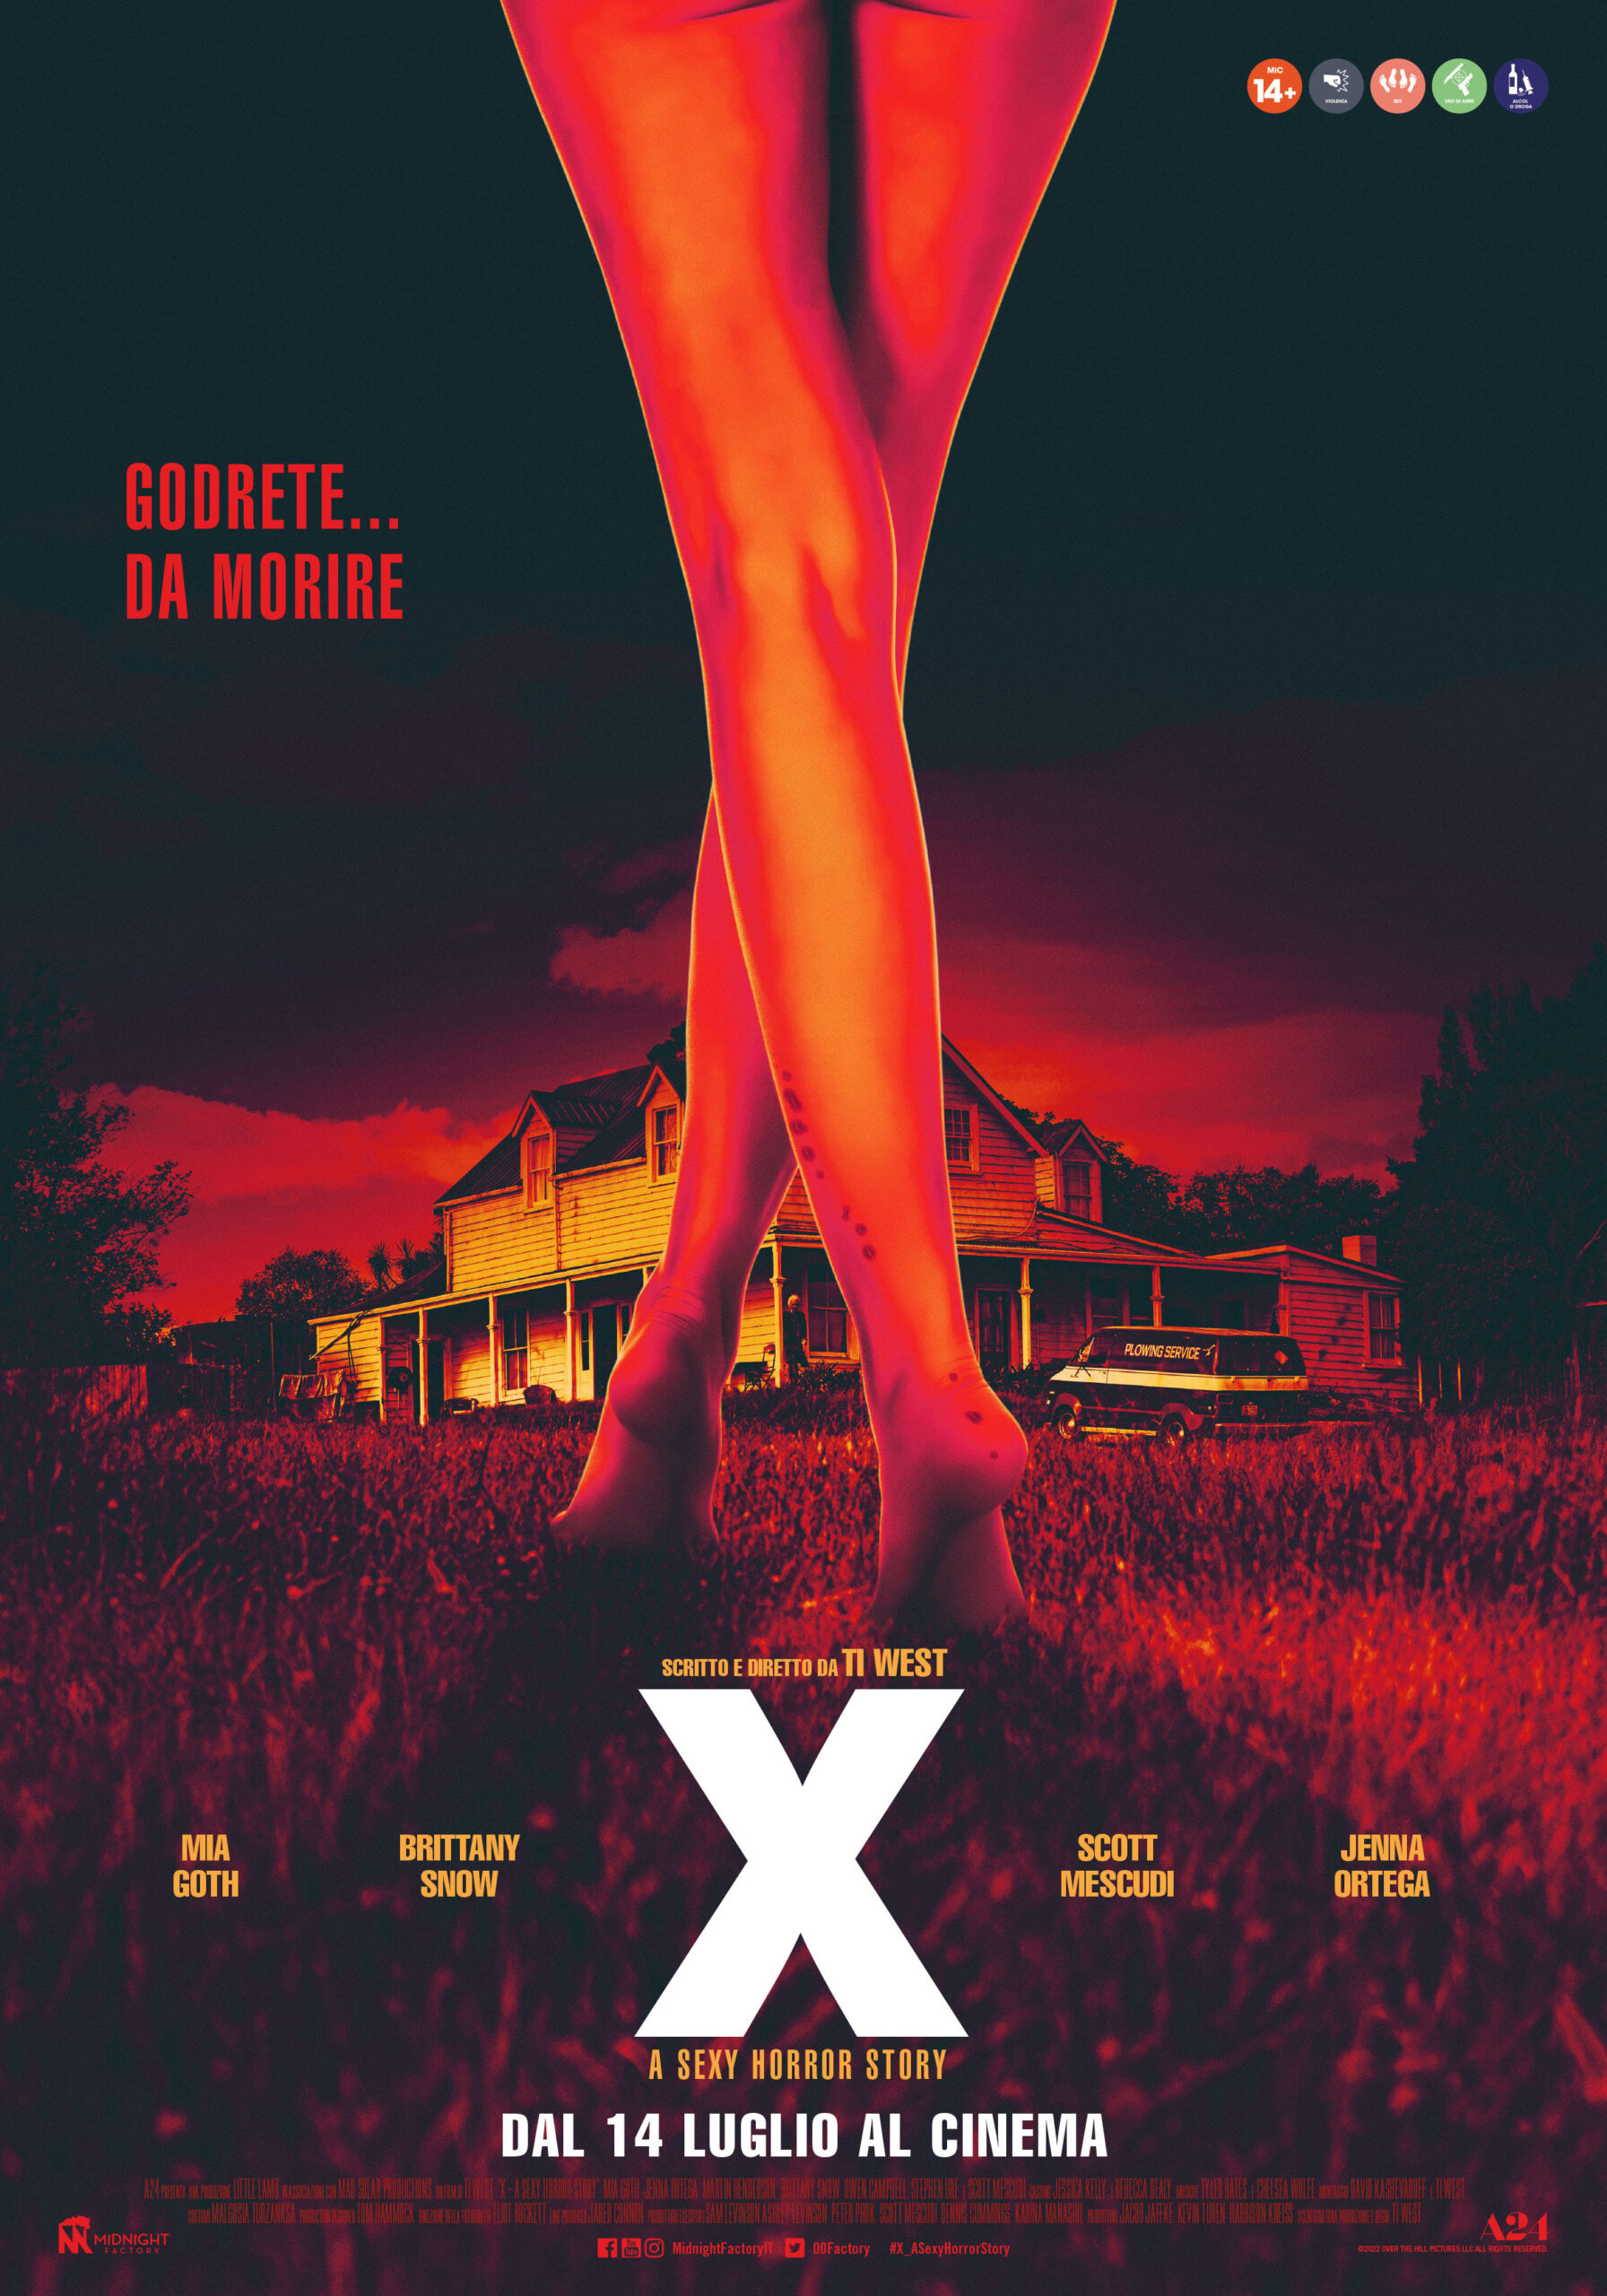 X - A Sexy Horror Story Ti West